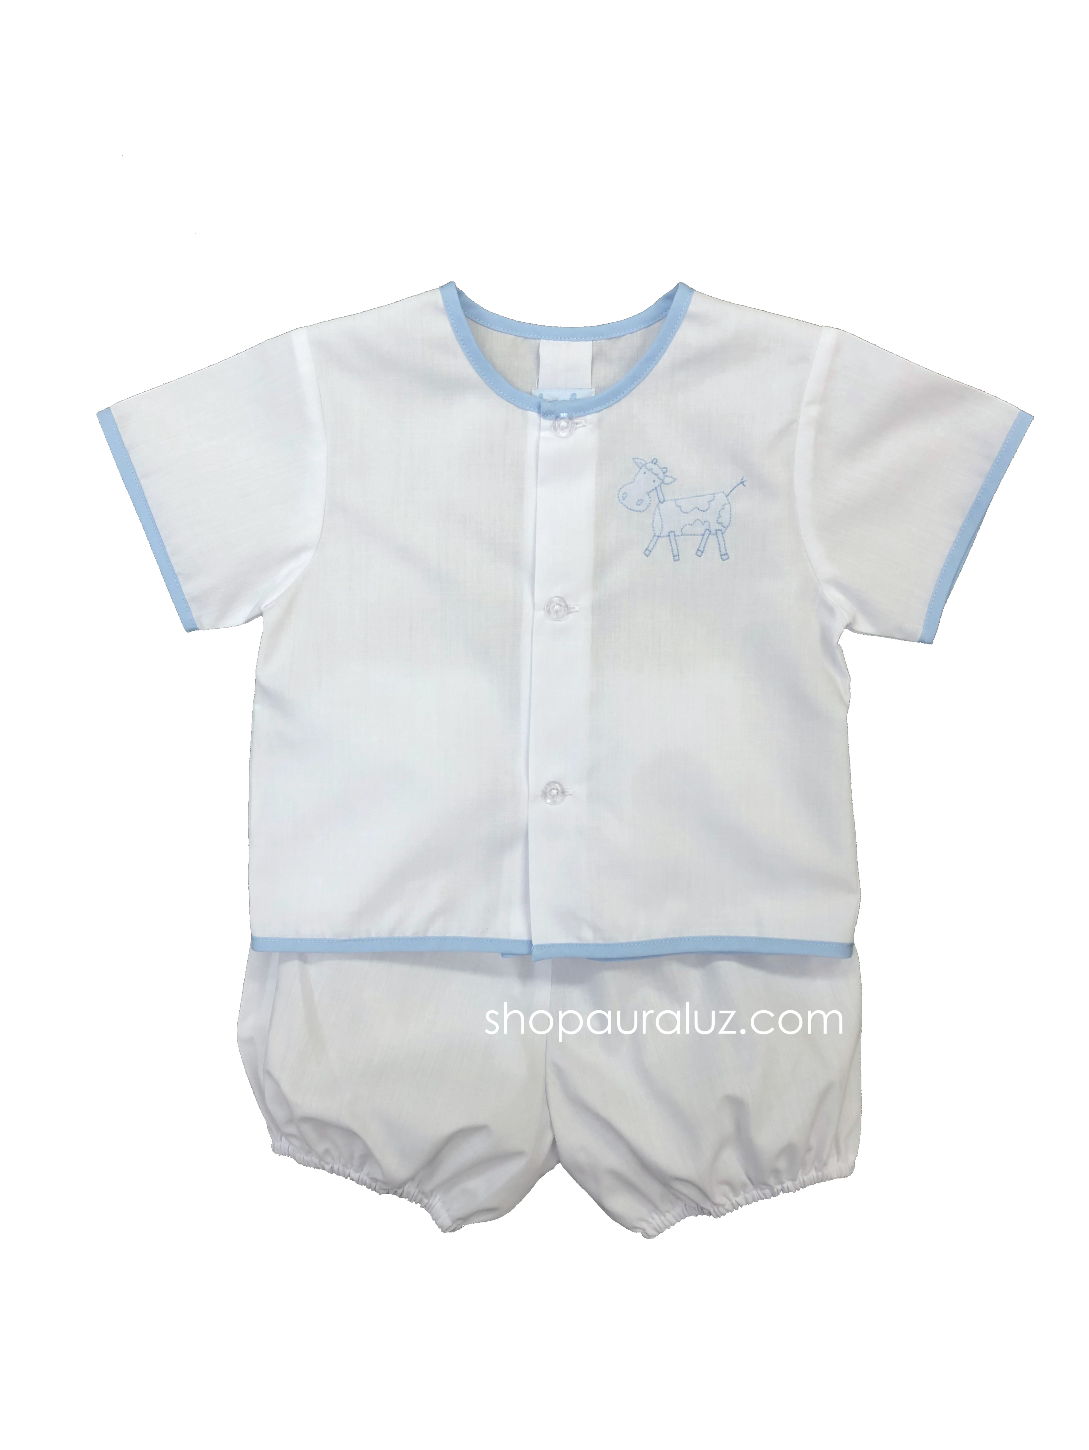 Auraluz Boy 2pc Set...White w/blue binding trim, bloomer shorts and cow embroidery